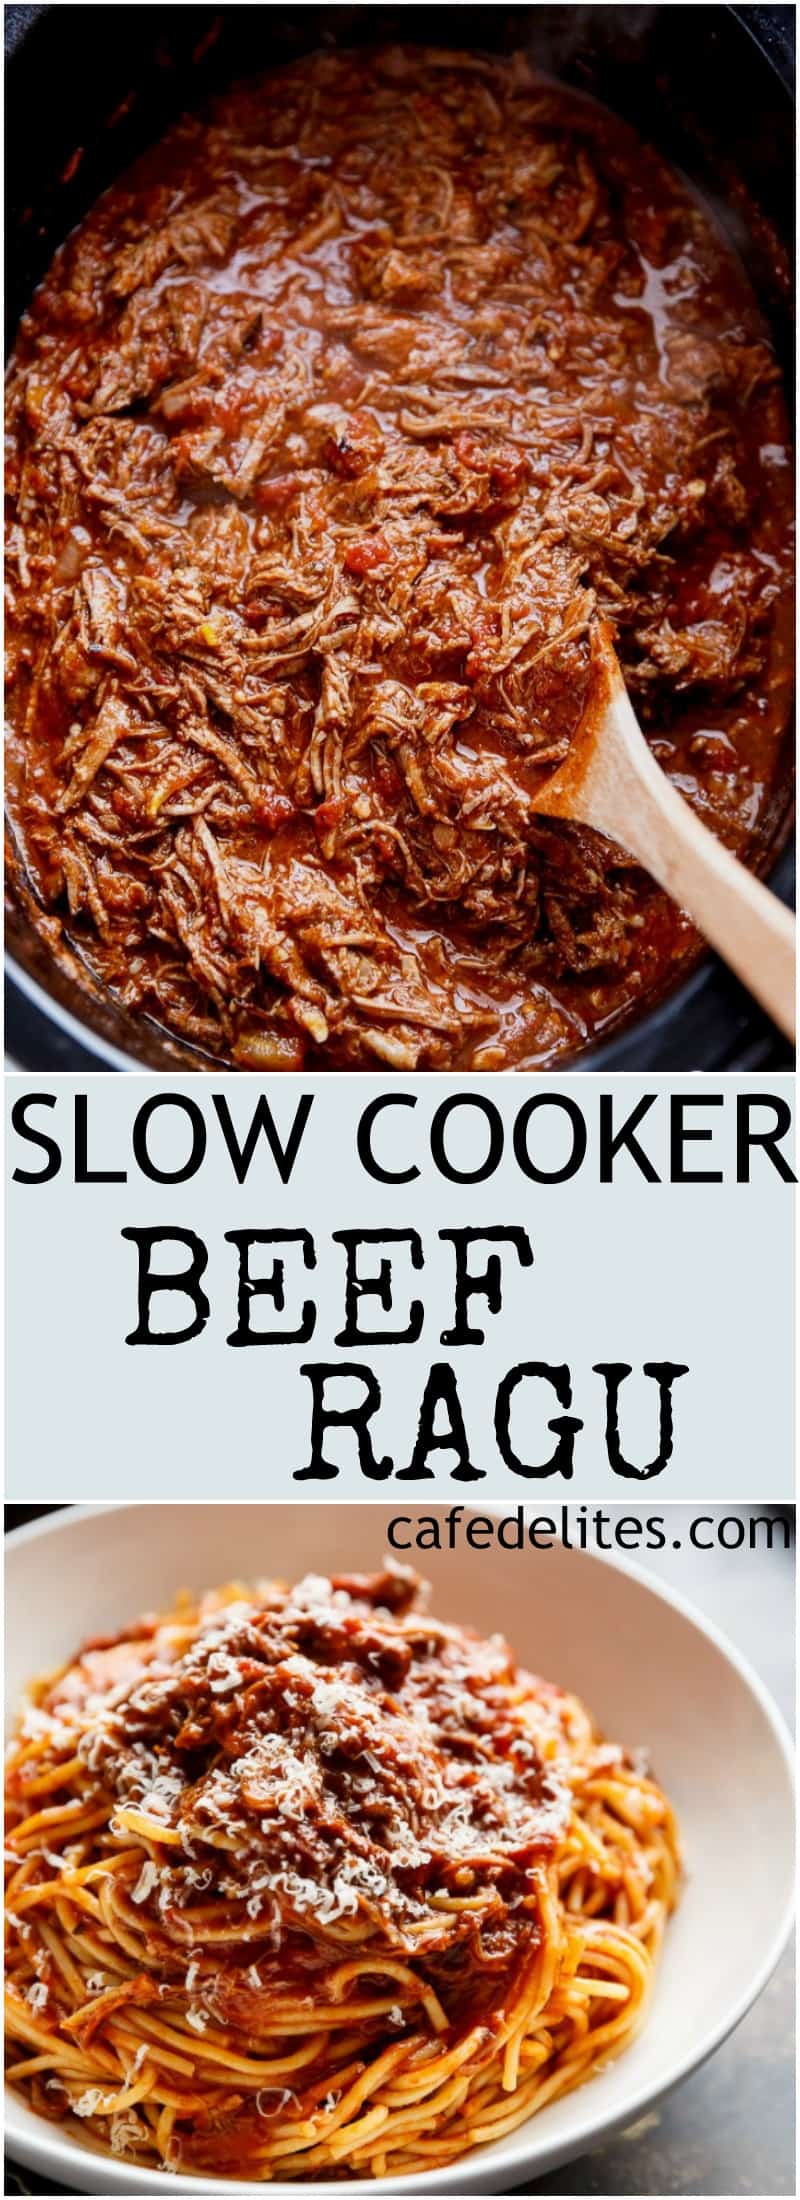 Slow Cooker Beef Ragu is a rich and tender, fall-apart tomato beef sauce. With all the magic happening in your slow cooker, come home to a satisfying, ready-made home cooked dinner! | https://cafedelites.com